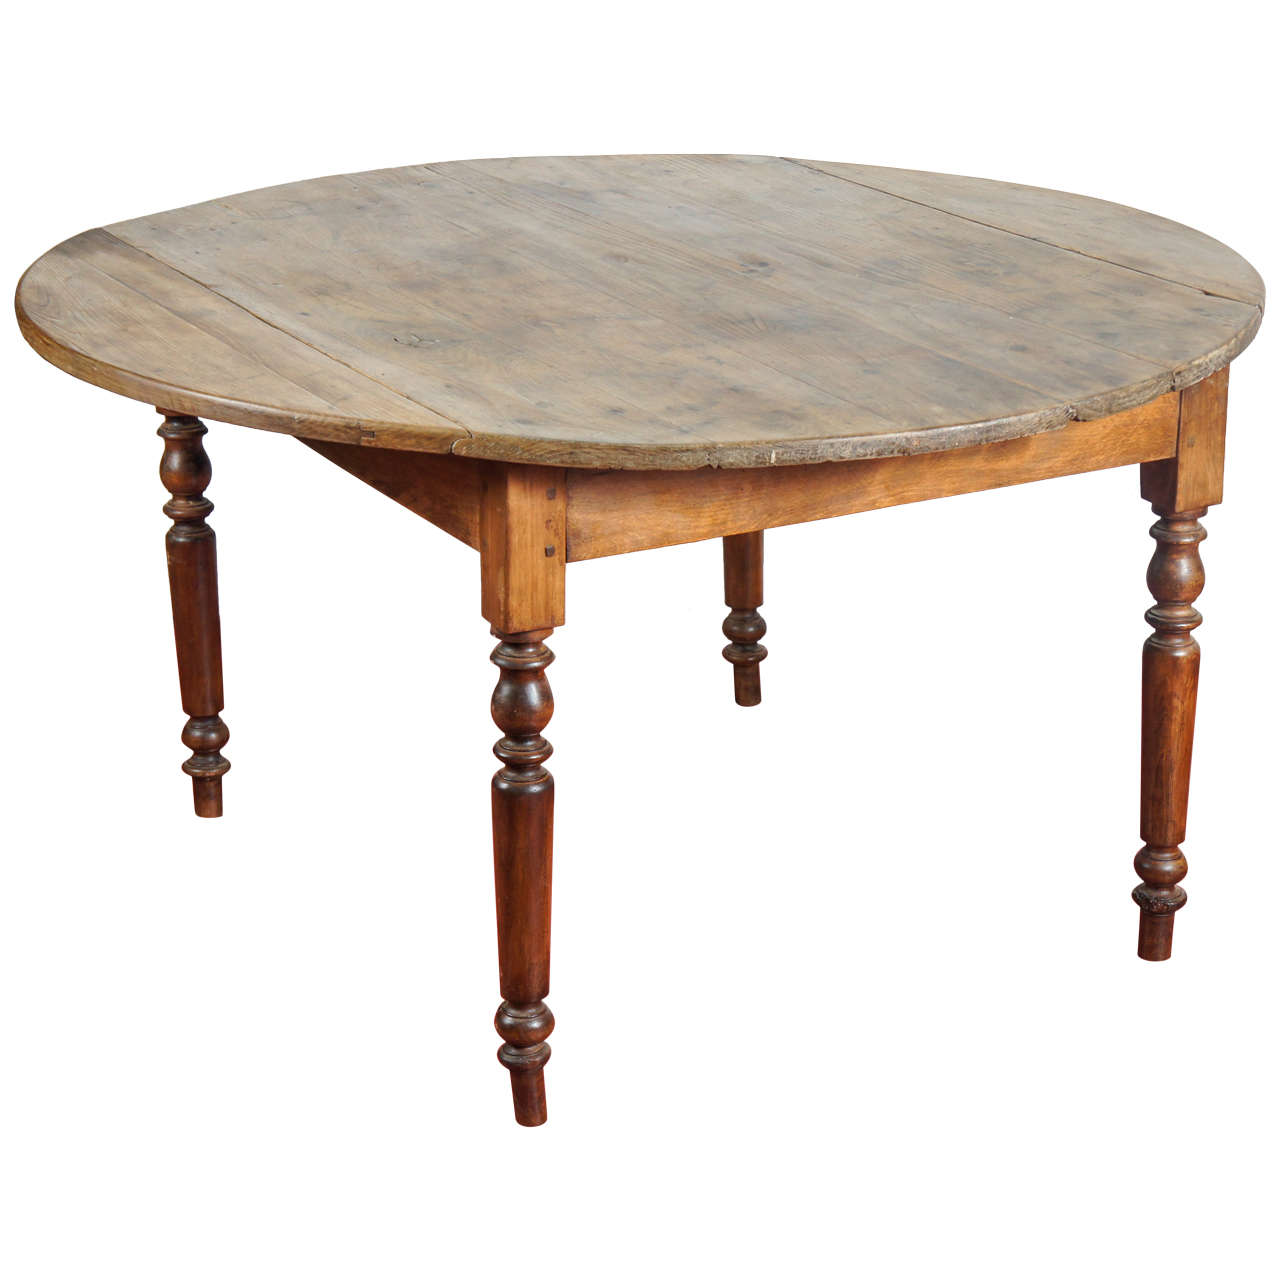 Antique Farm Round Drop Leaf Table At 1stdibs